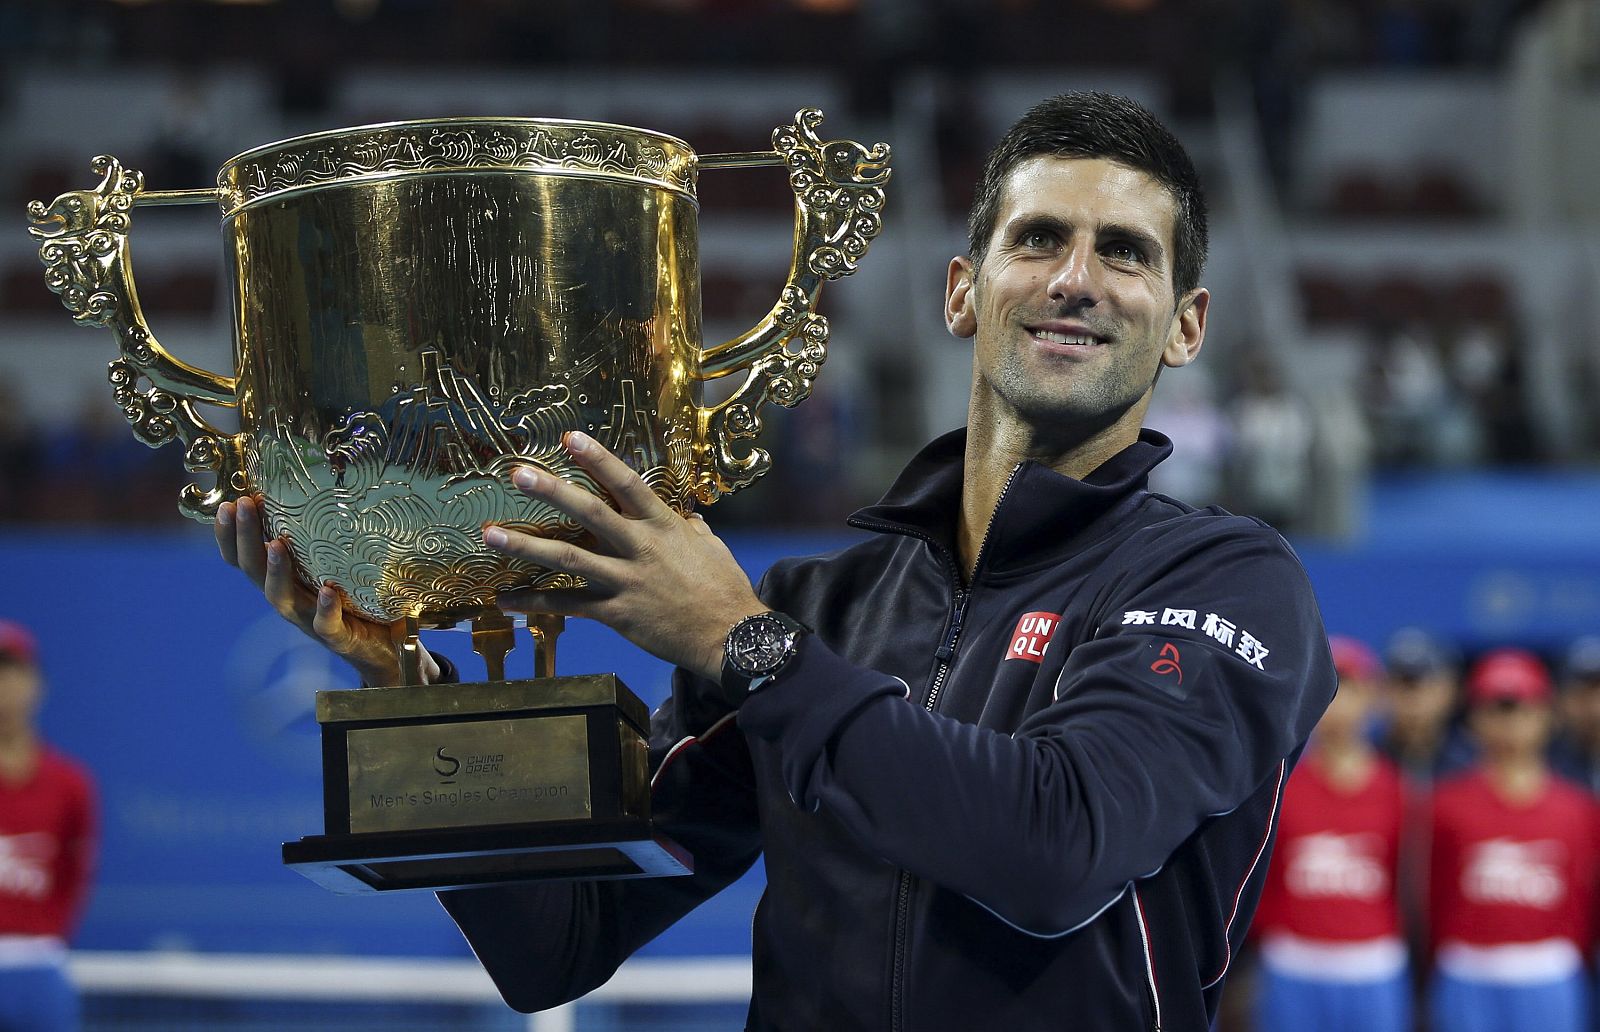 Djokovic of Serbia holds his trophy as he poses for pictures after winning the men's singles final match against Berdych of the Czech Republic at the China Open tennis tournament in Beijing